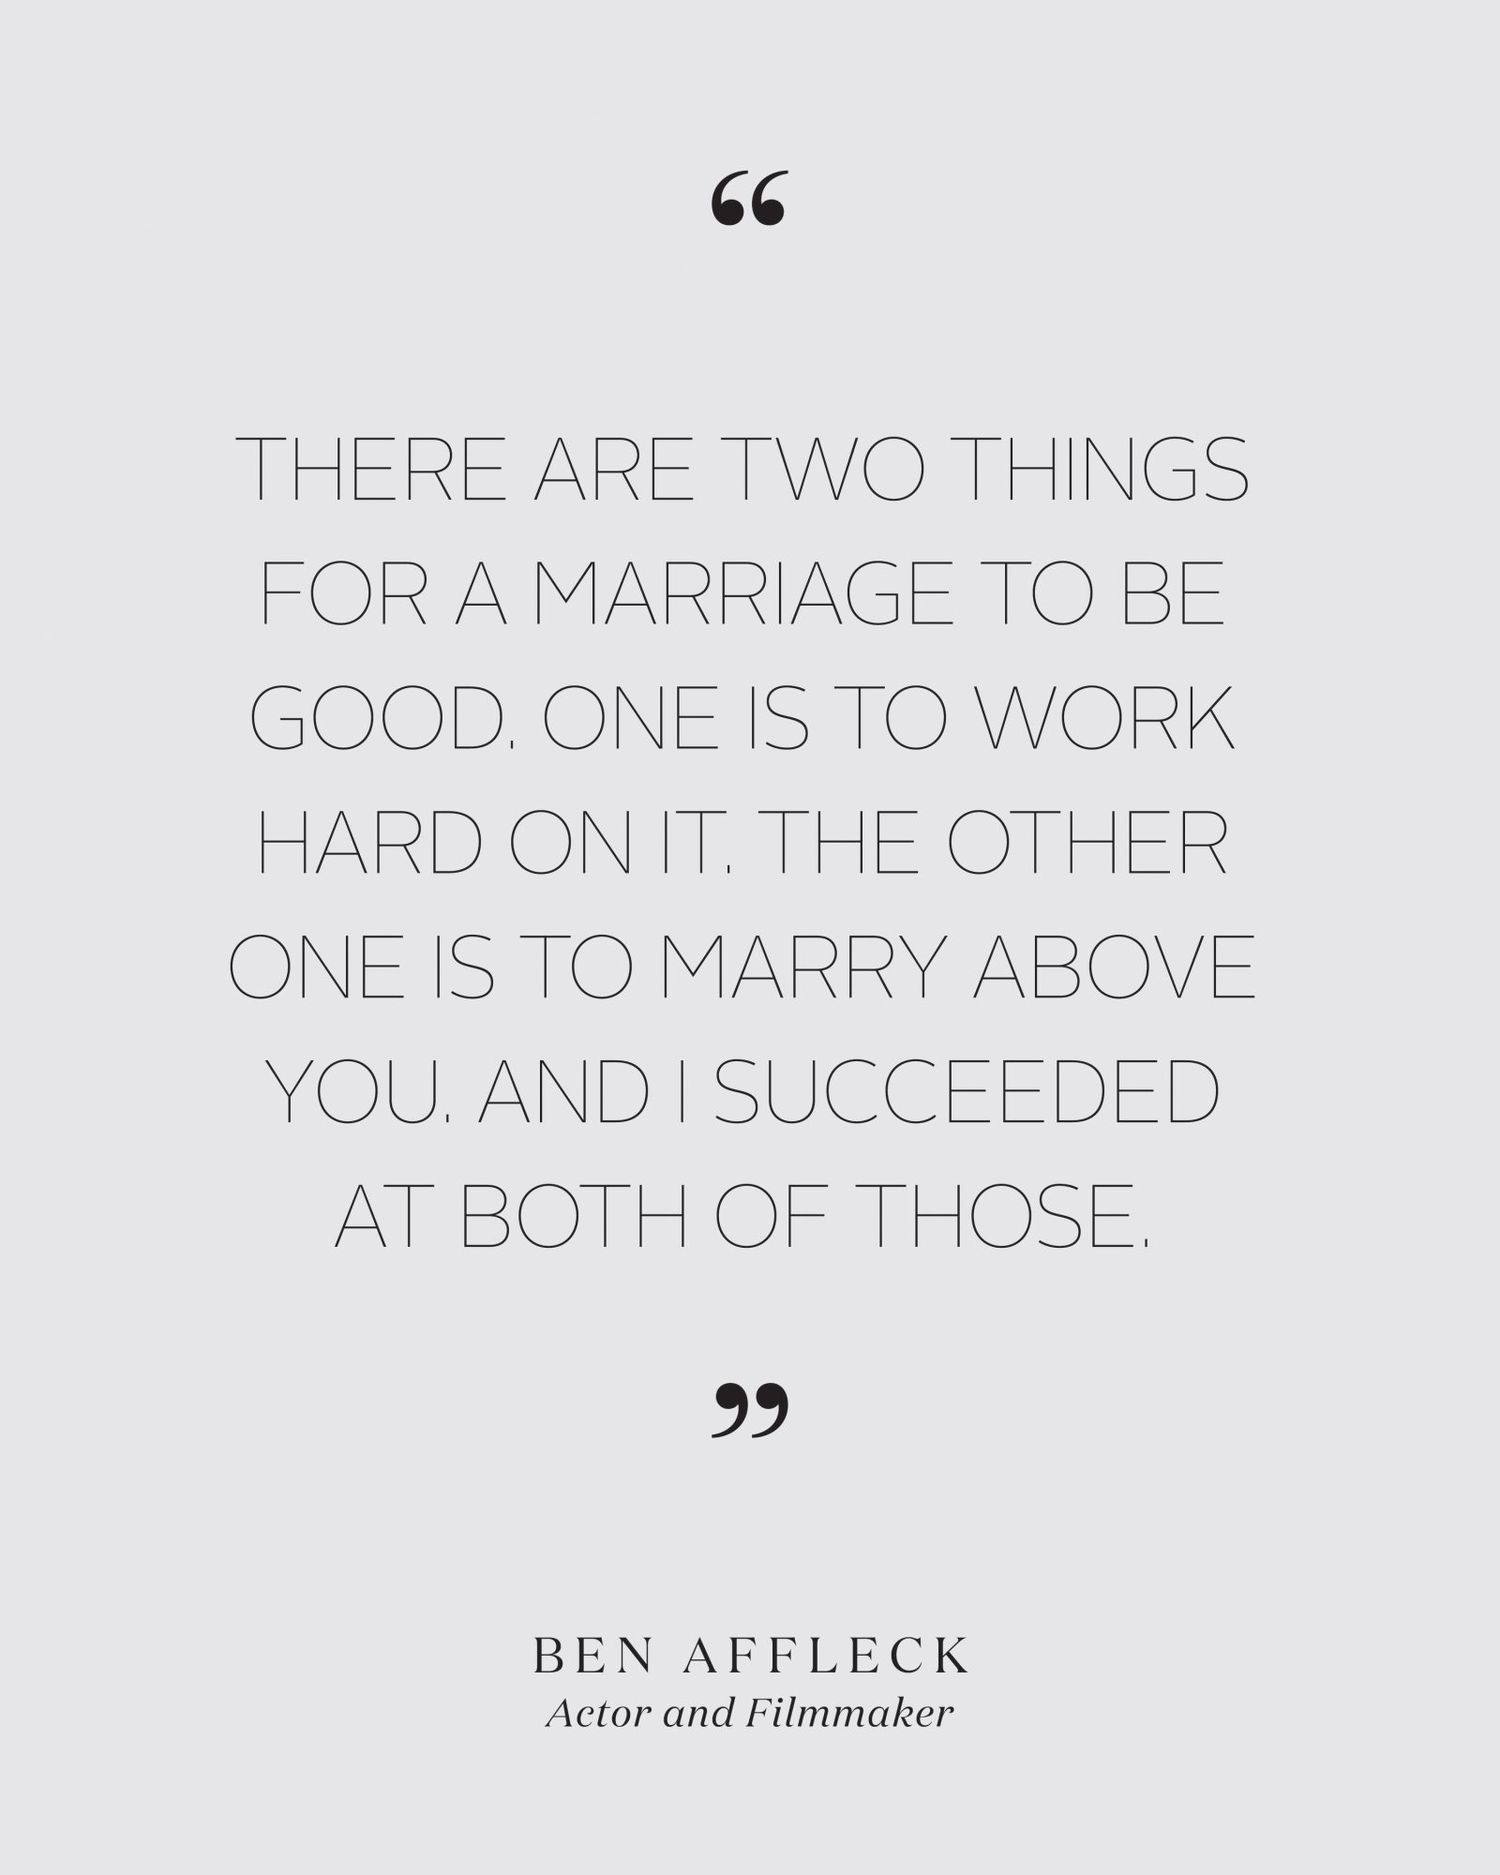 msw-wedding-quotes14-0315.jpg